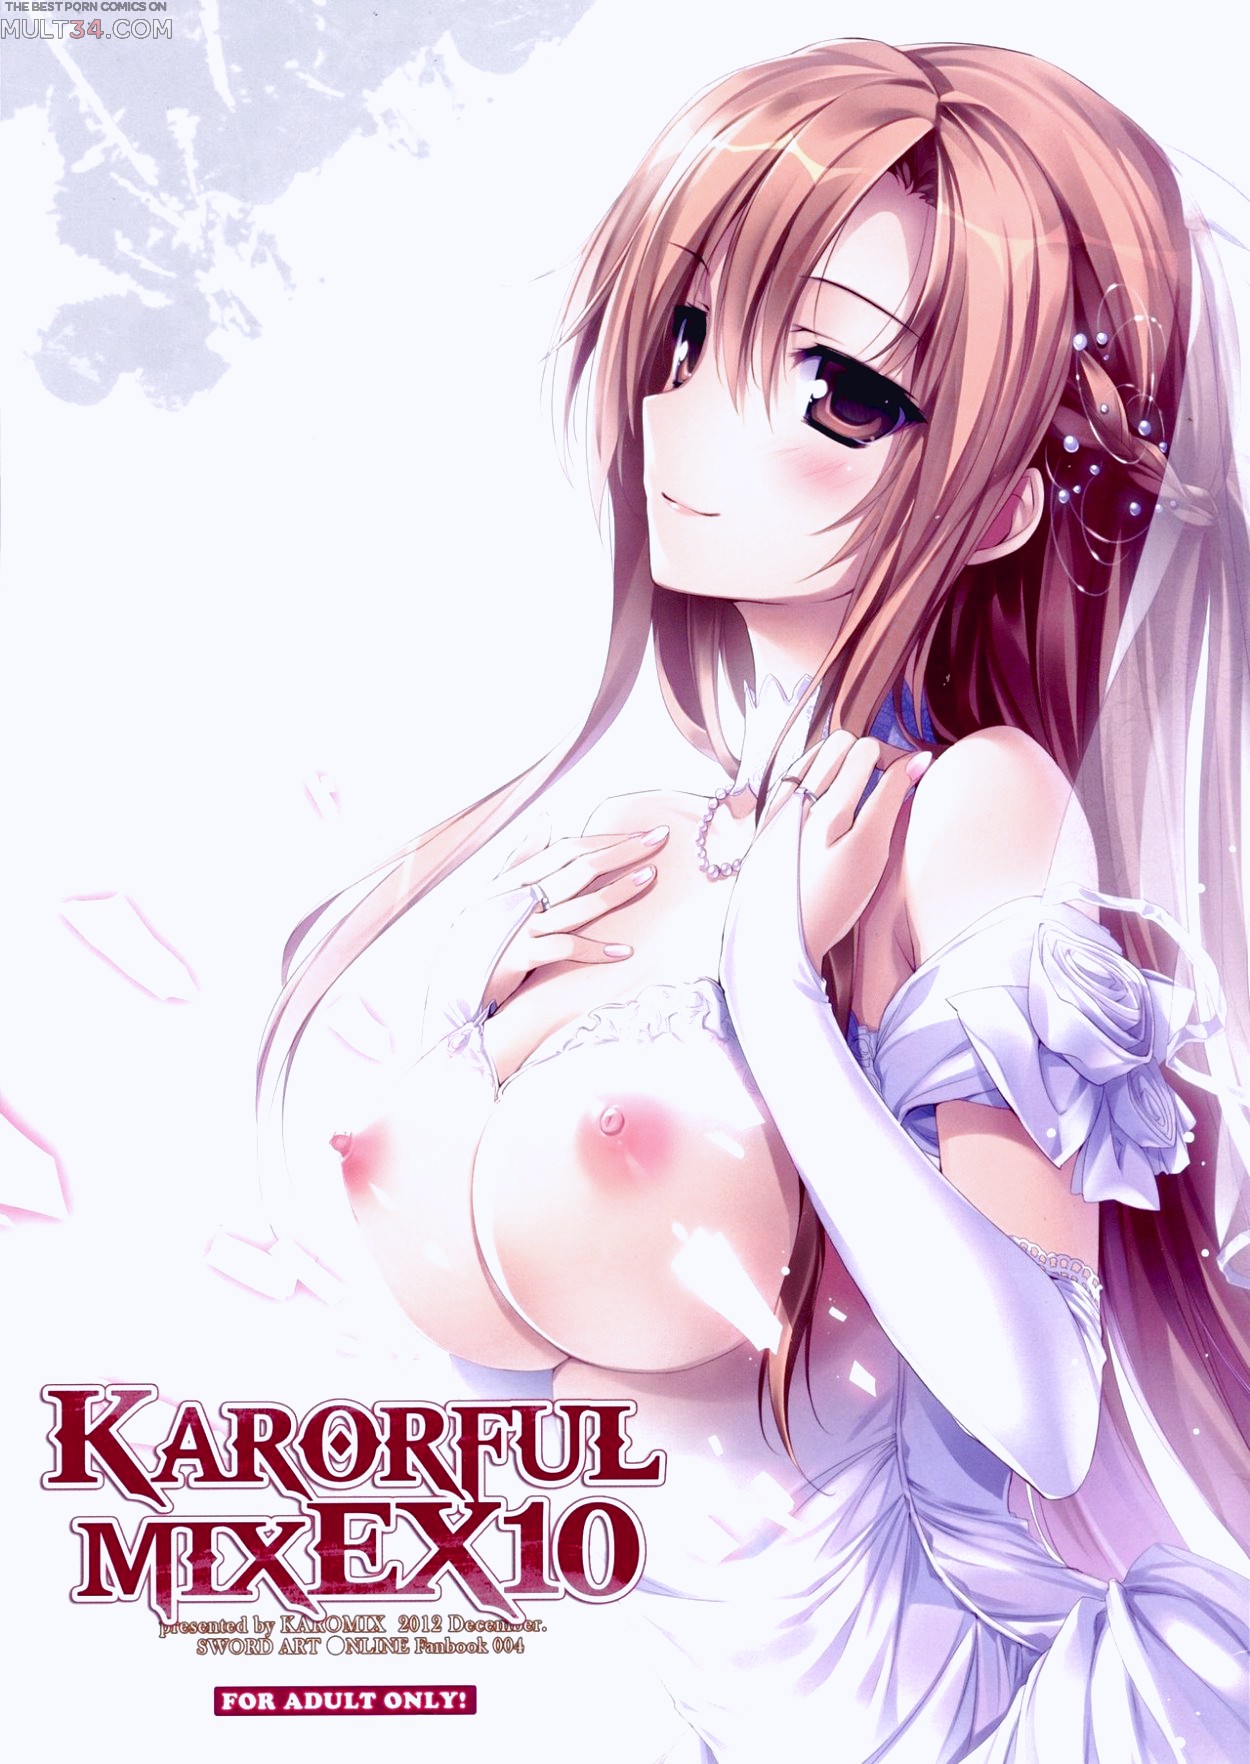 KARORFUL MIX EX10 porn comic page 1 on category sword art online